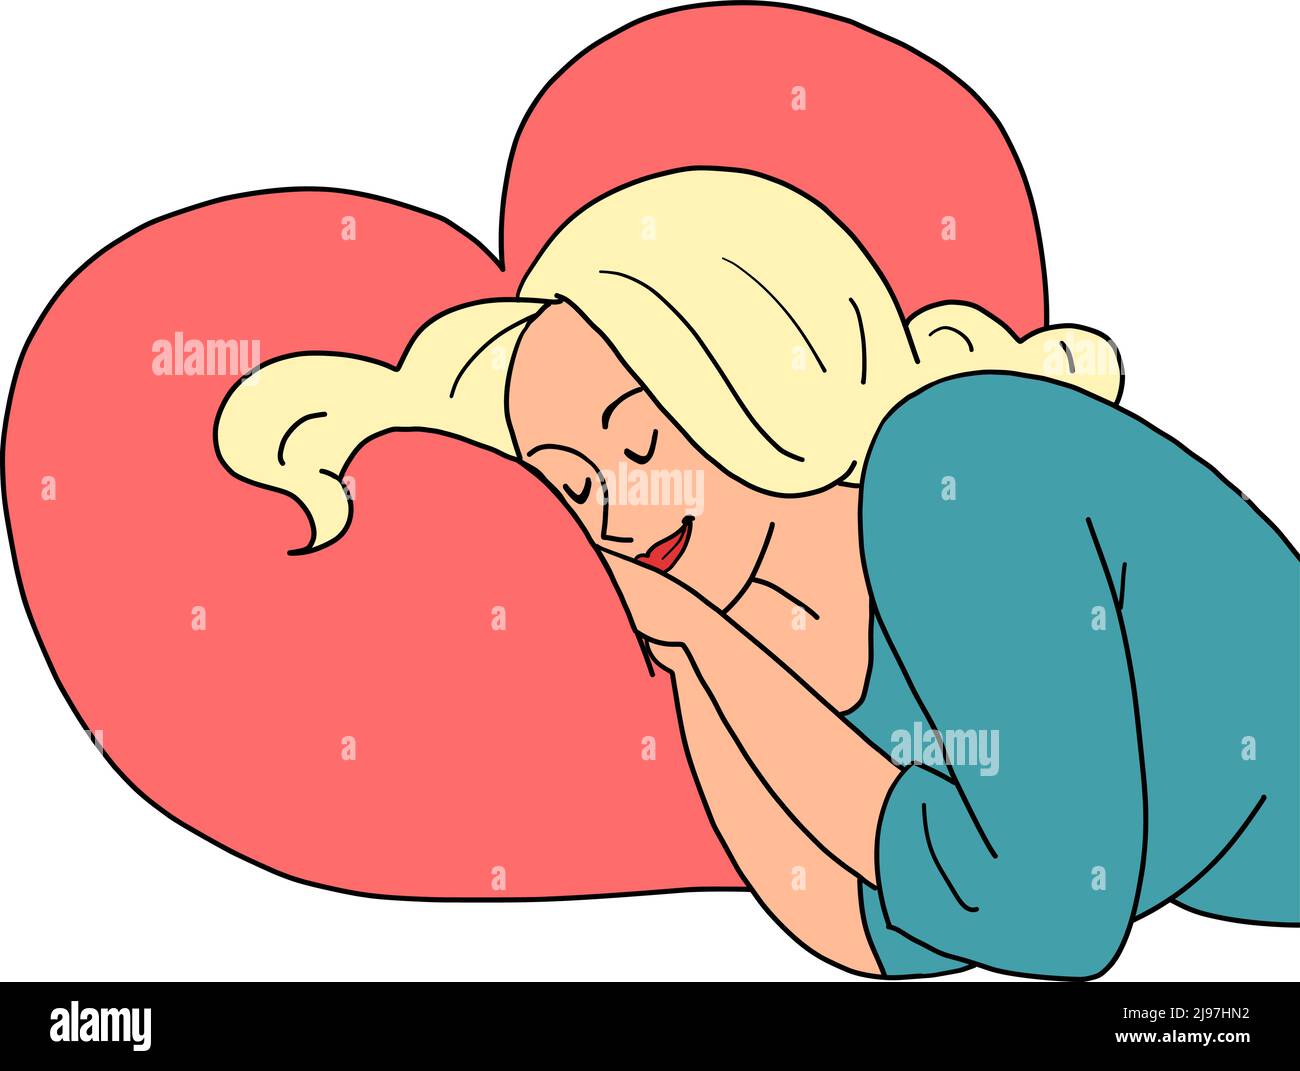 A young woman sleeps at night, rest fatigue. Homey, relaxed atmosphere Stock Vector